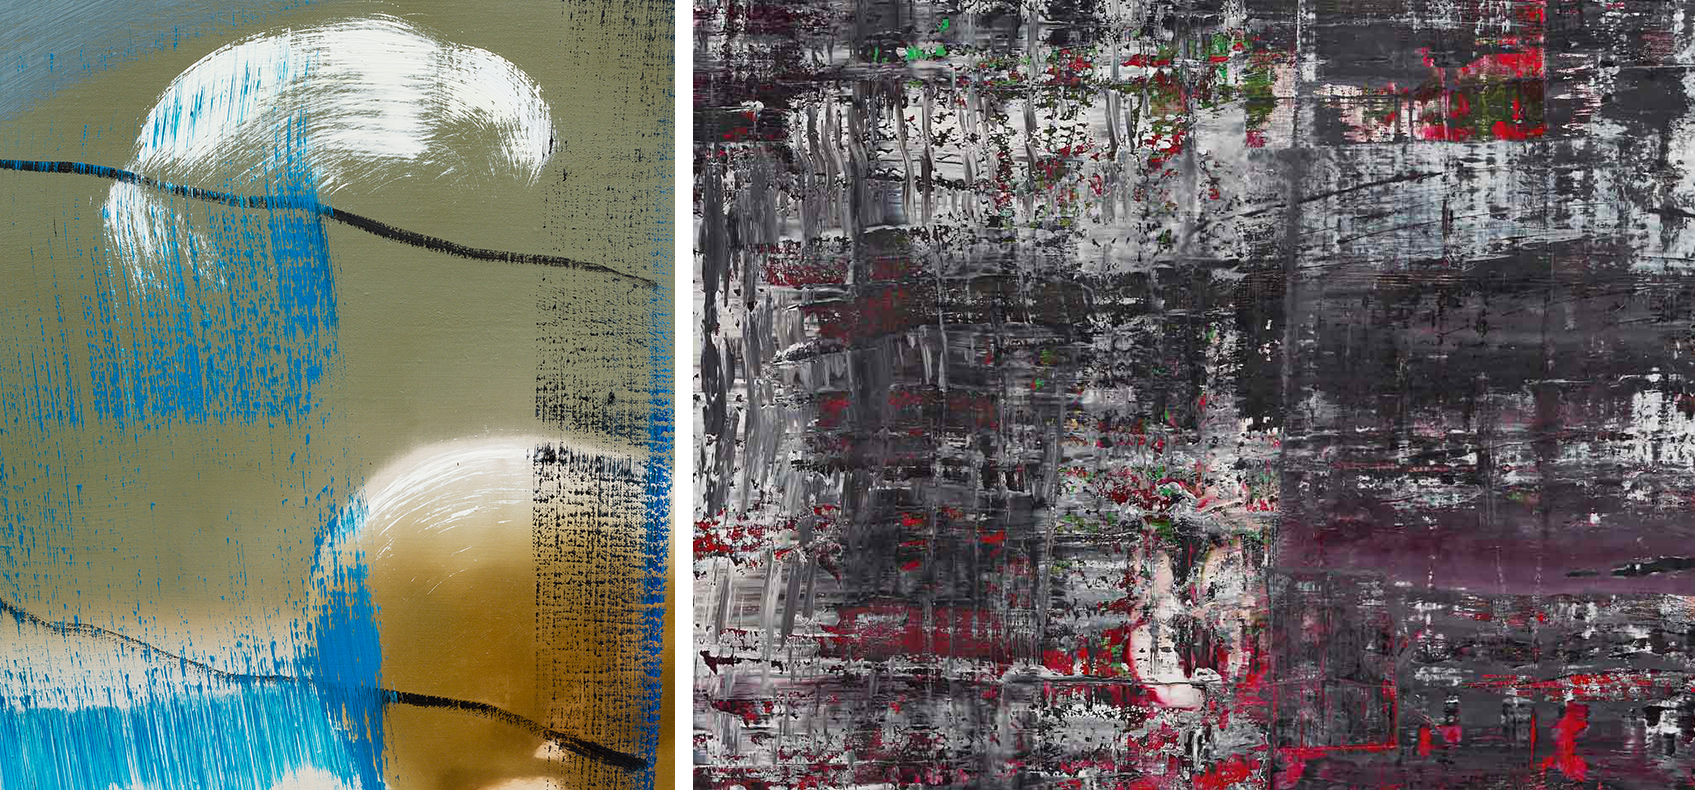 Gerhard Richter: Schädel, abstrakt - From the Research Department - Viewing Room - From the Research Department